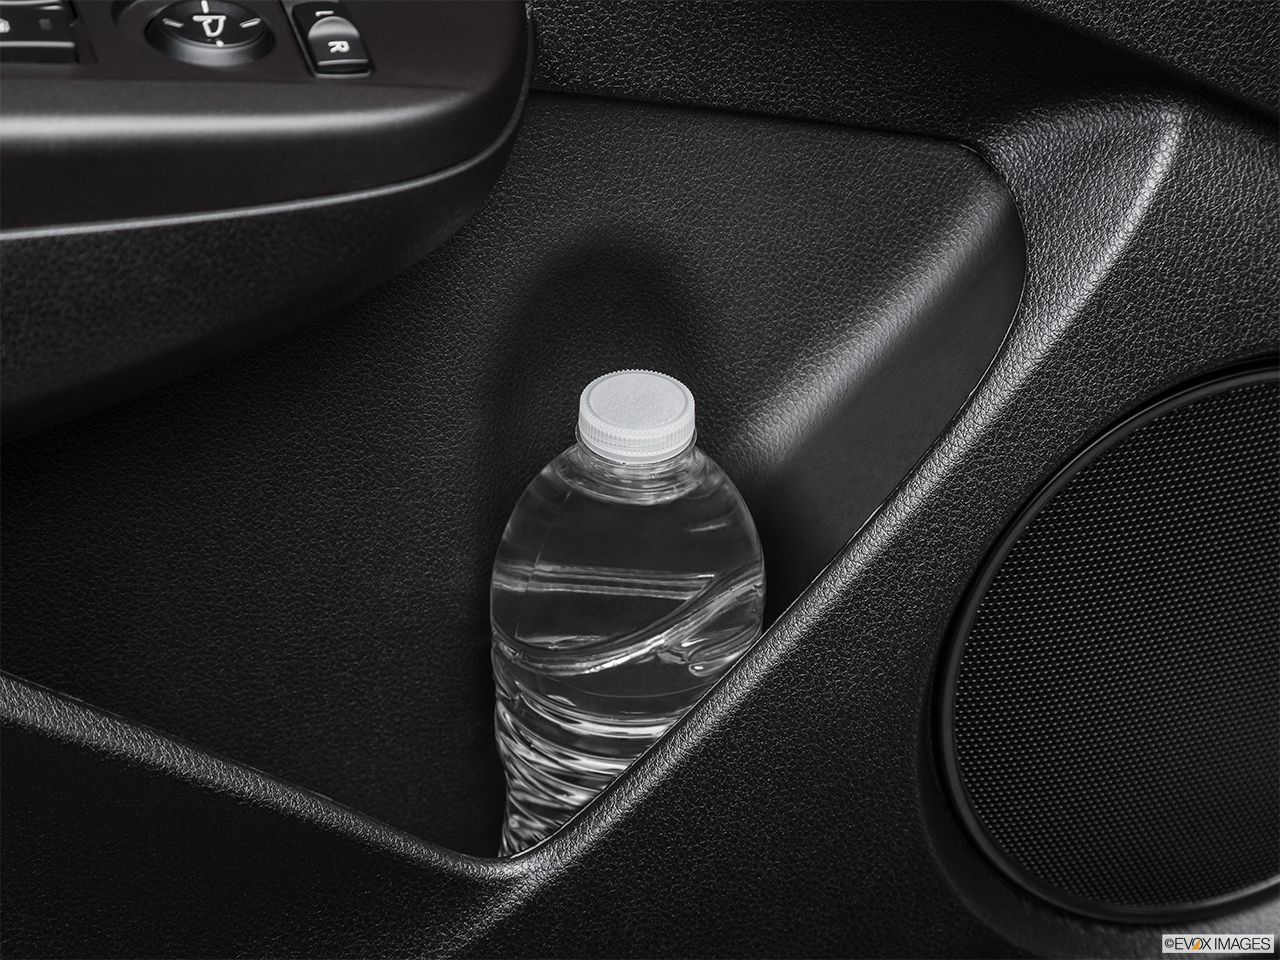 2016 Acura RDX Base Cup holder prop (tertiary). 